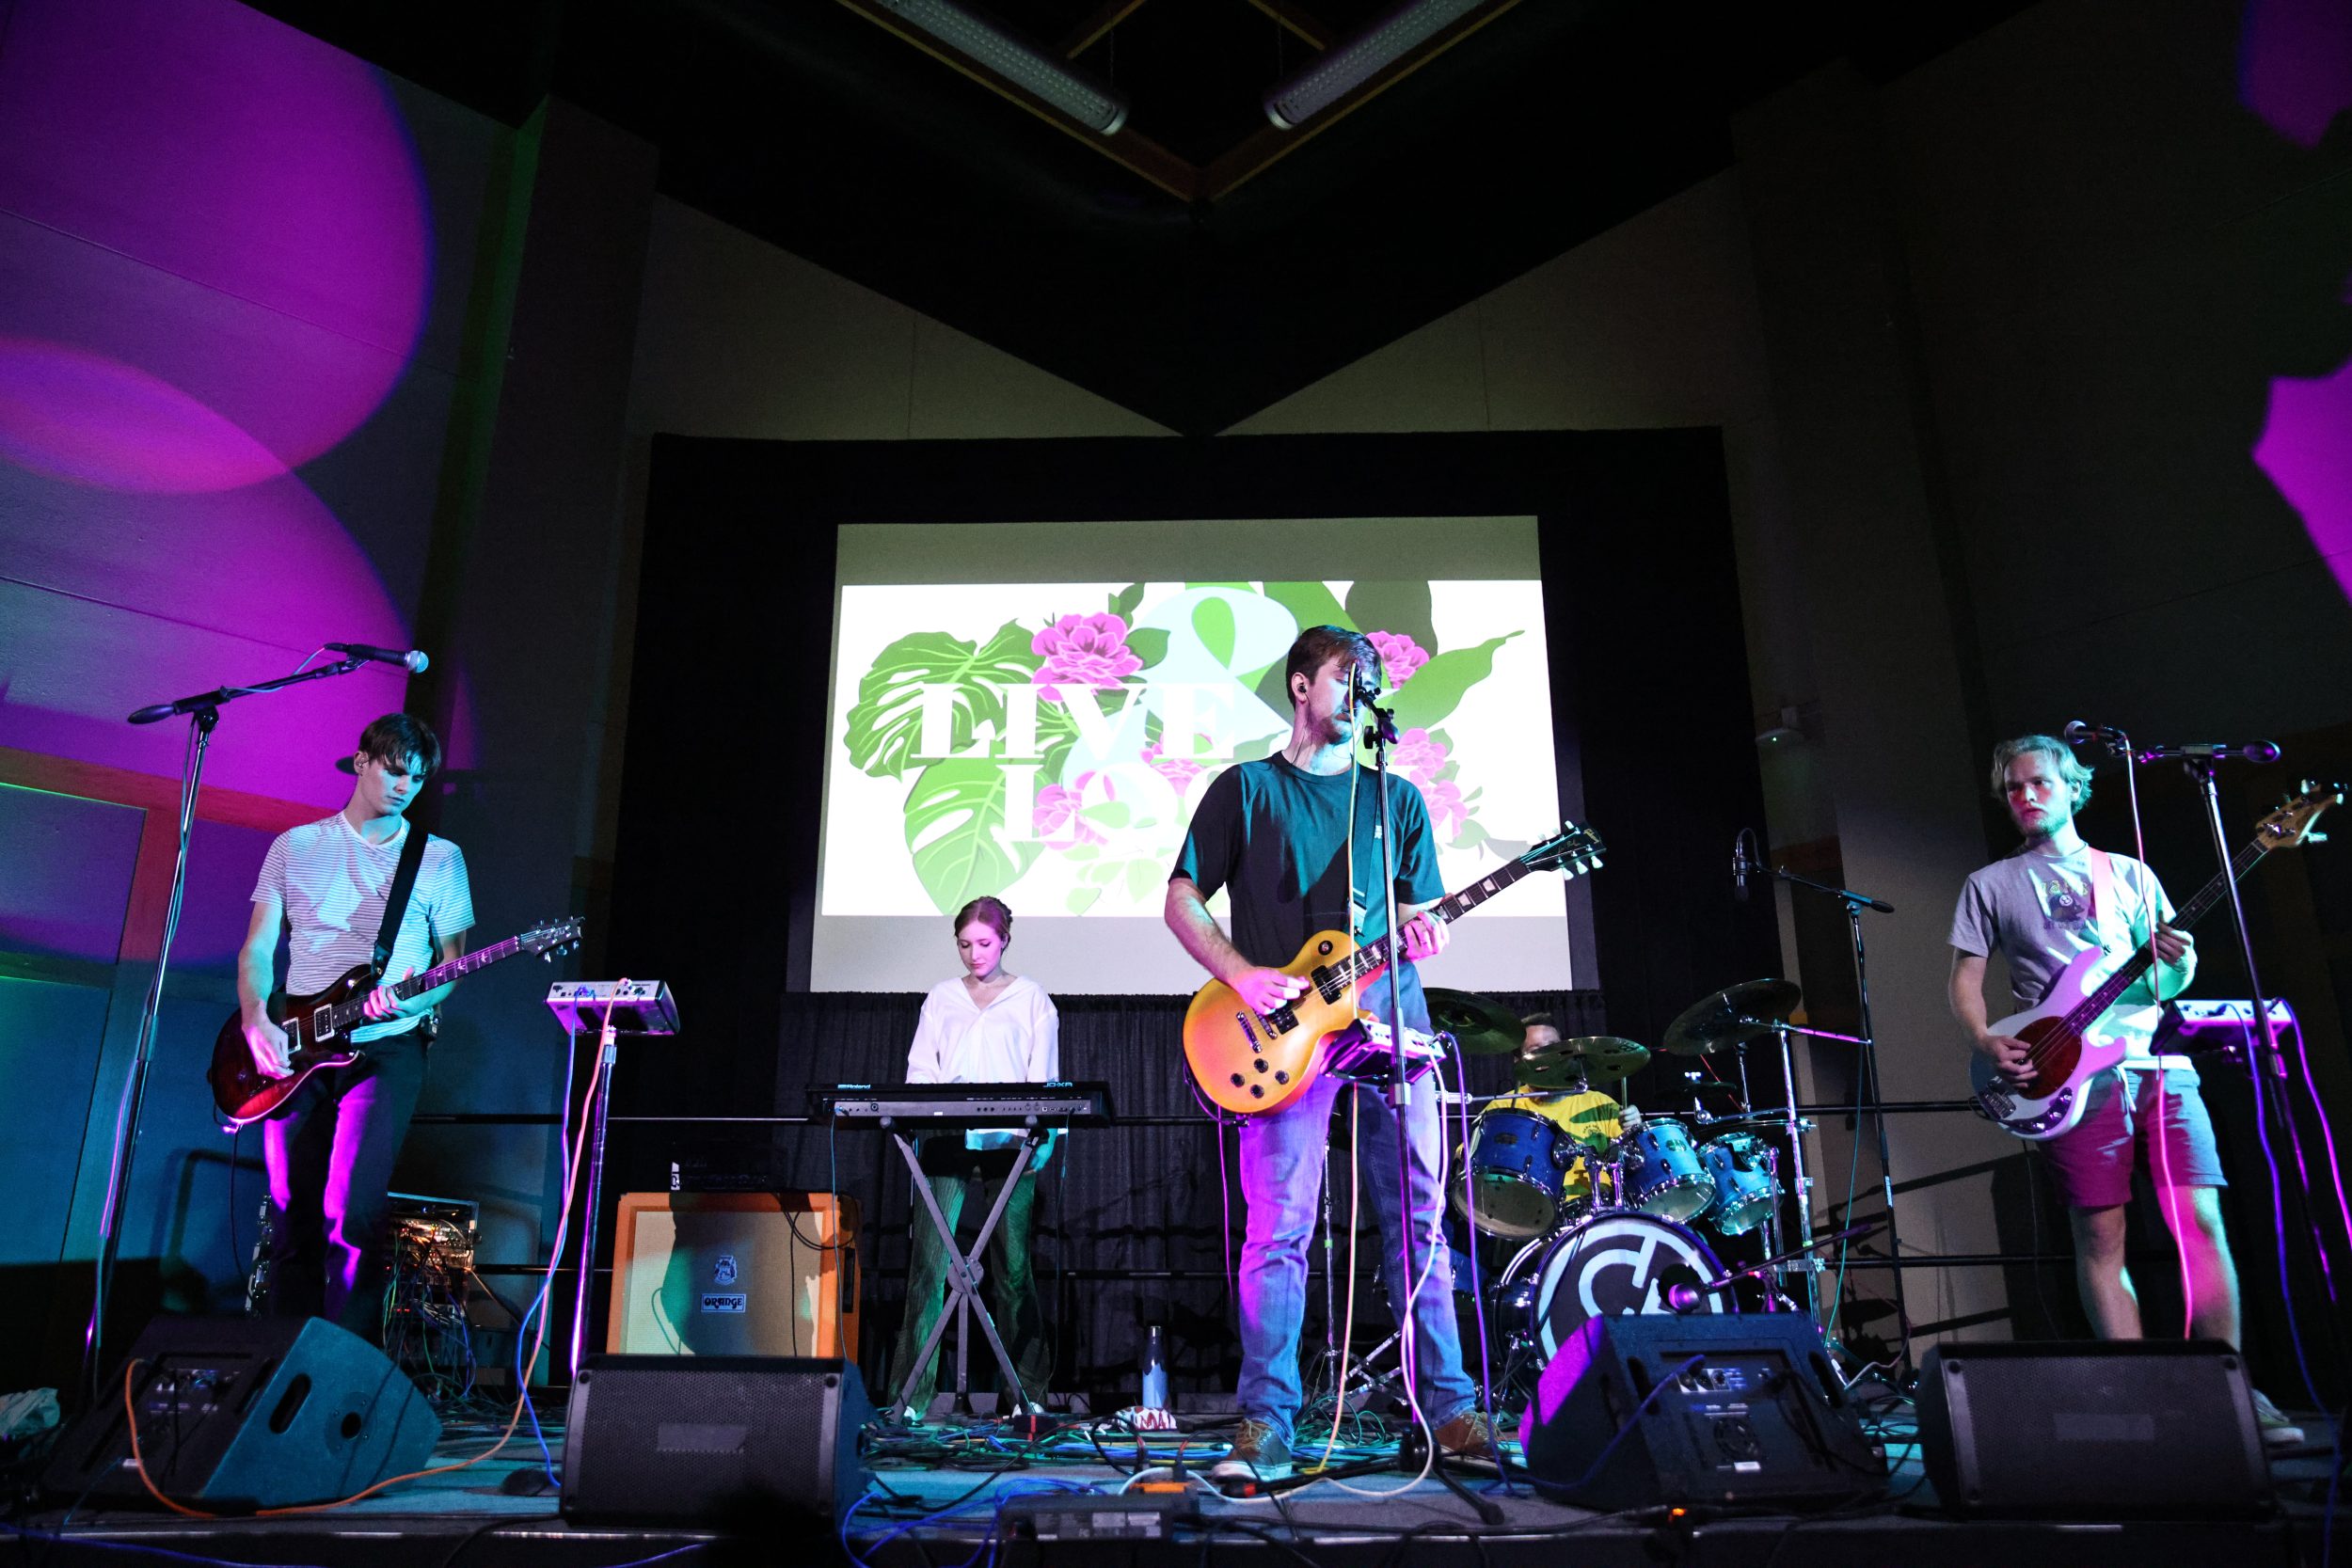 Live and Local brings four local bands to rock the stage as they welcome students back